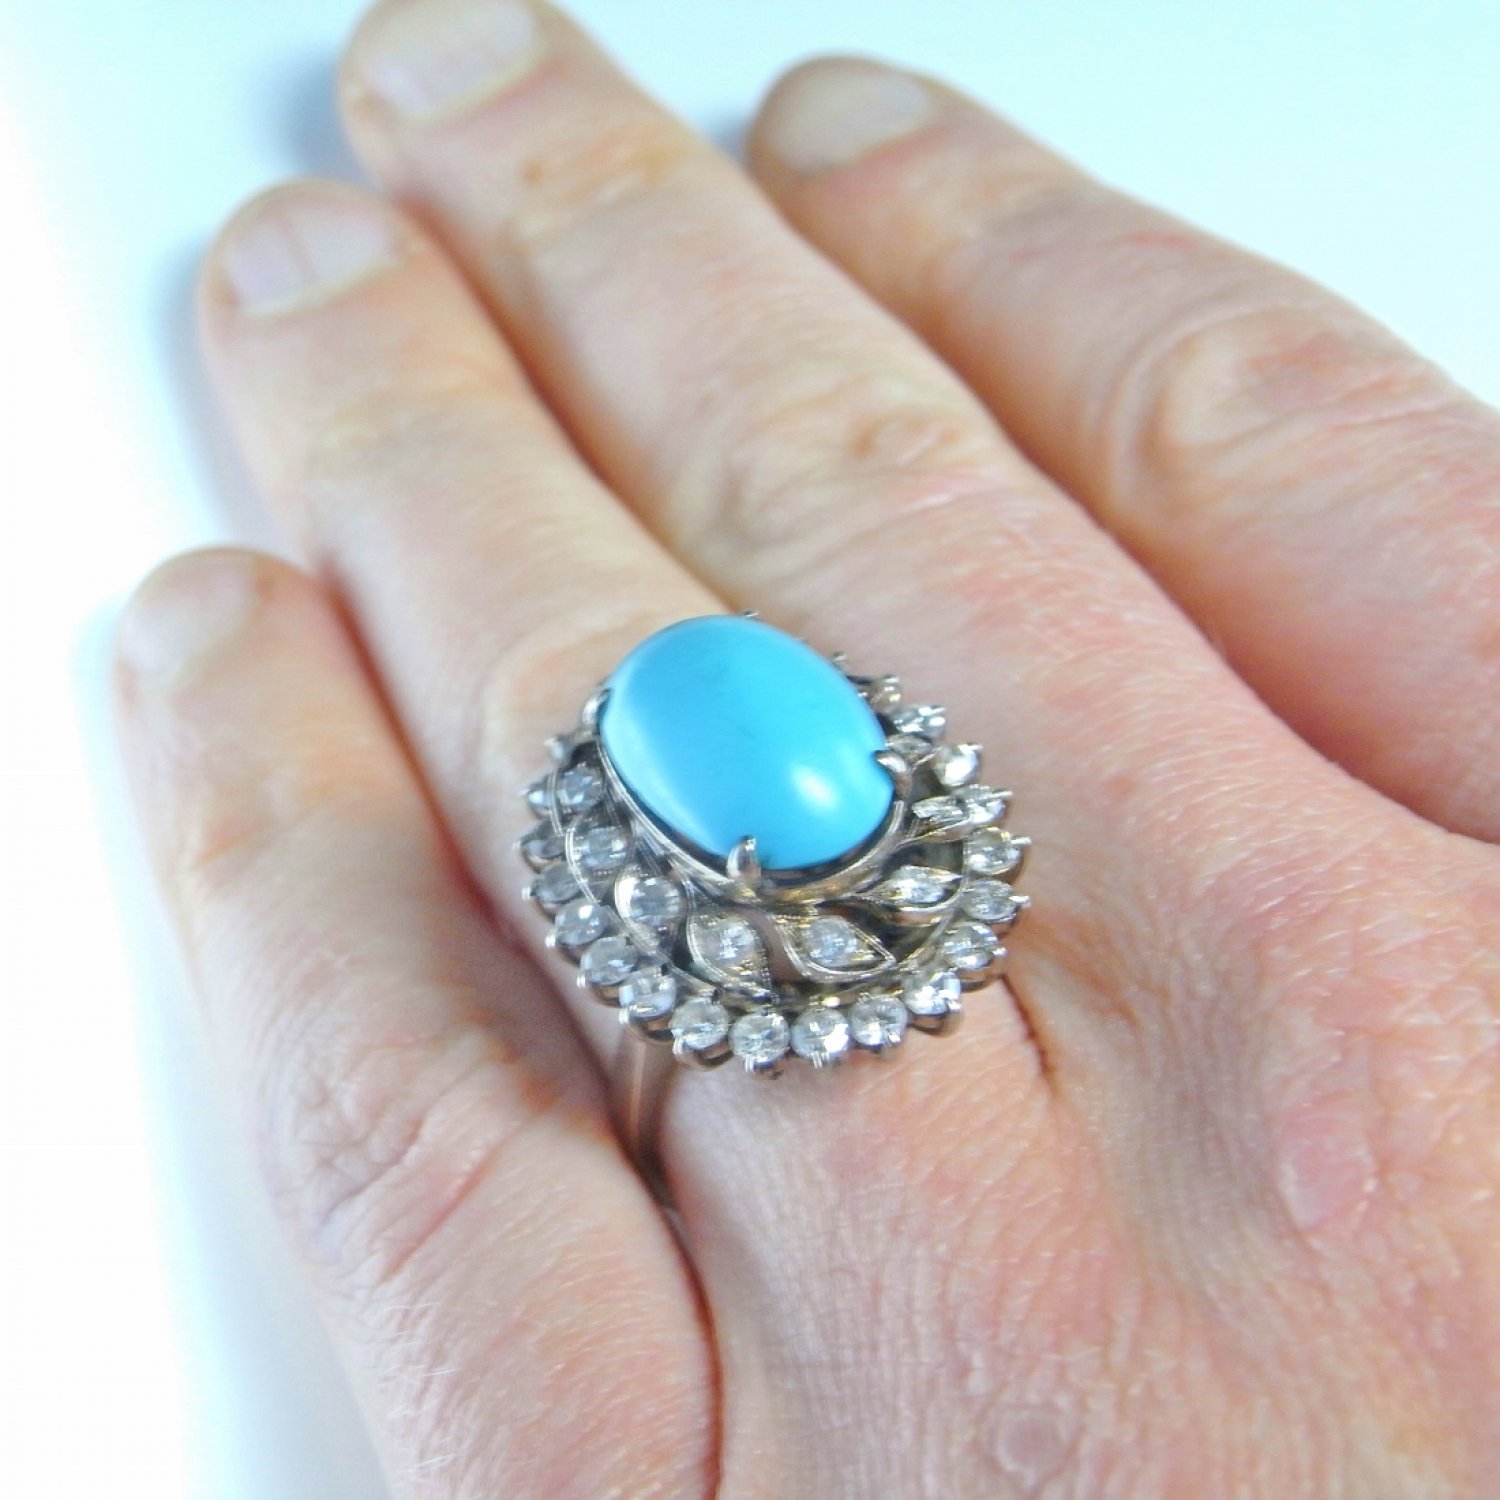 Turquoise Diamond Ring 18K Gold Ring Art Deco Diamond Ring Bombe Dome Cluster Ballerina Turquoise Cabochon Handmade Heirloom Jewelry 1920s 1930s 1940s Ring Exceptional Natural Turquoise Luxury High End